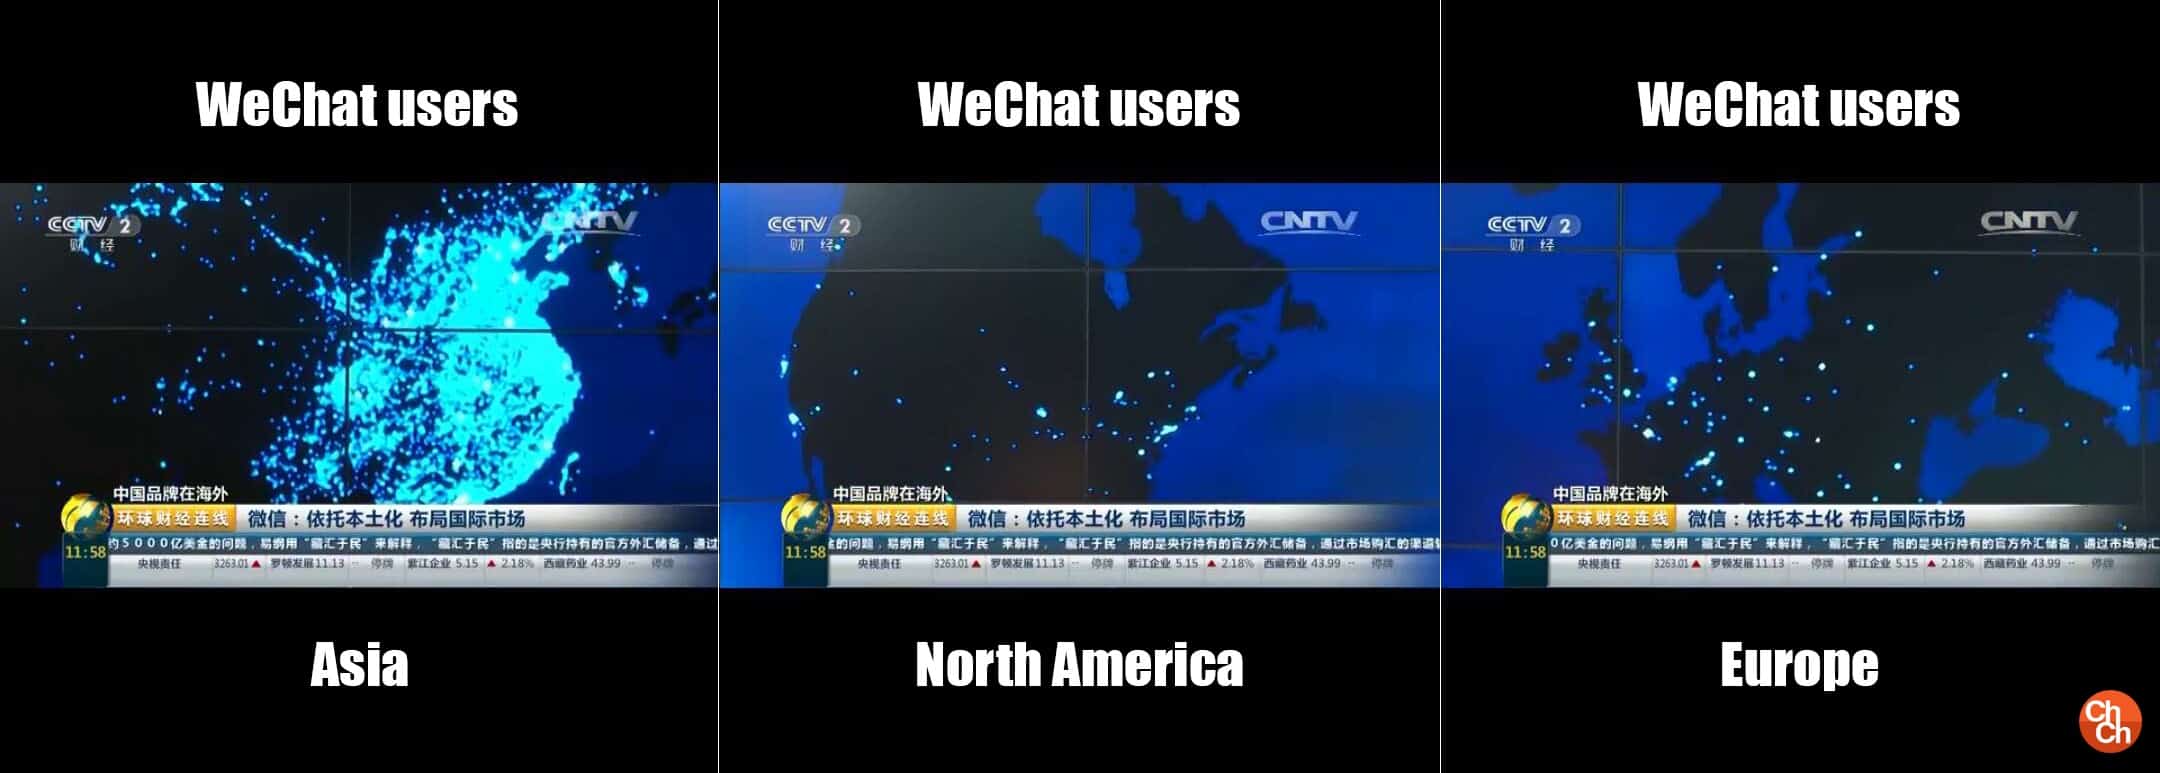 nguoi dung wechat